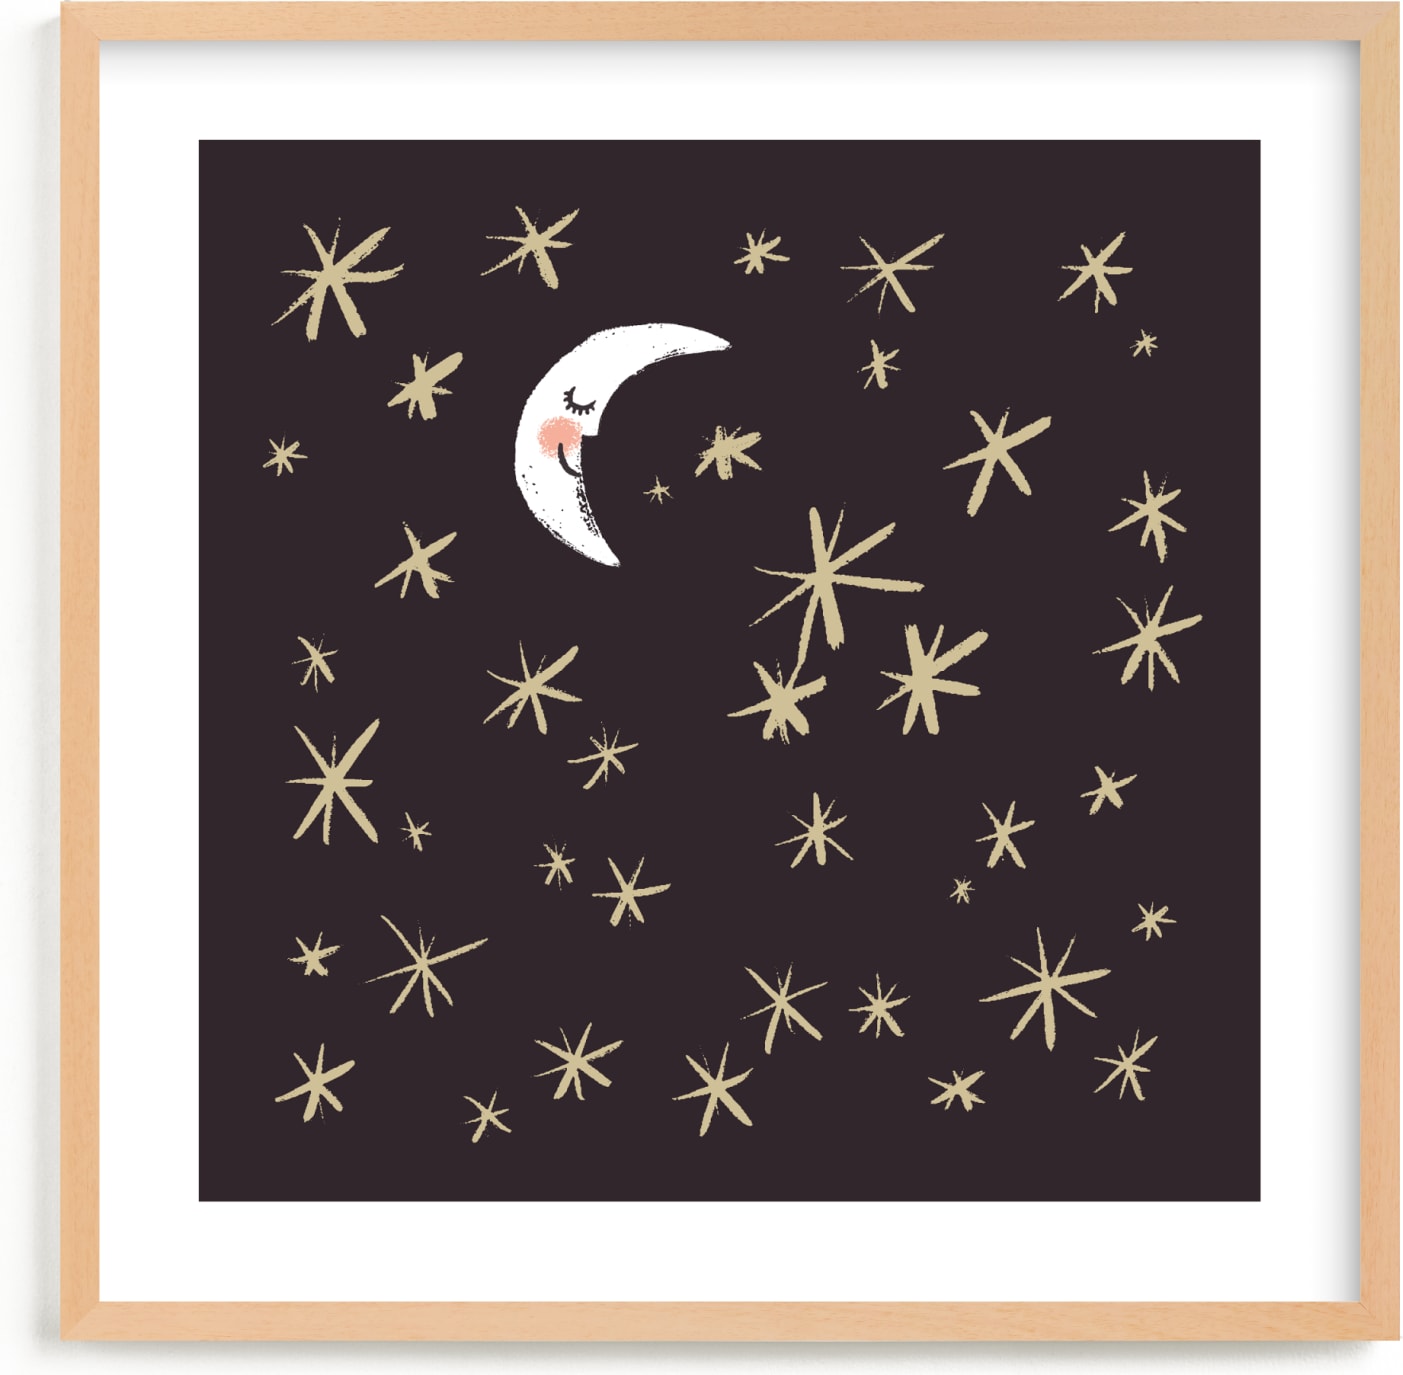 This is a black and white, grey, gold kids wall art by Patrice Horvath called Good Night Moon and Stars.